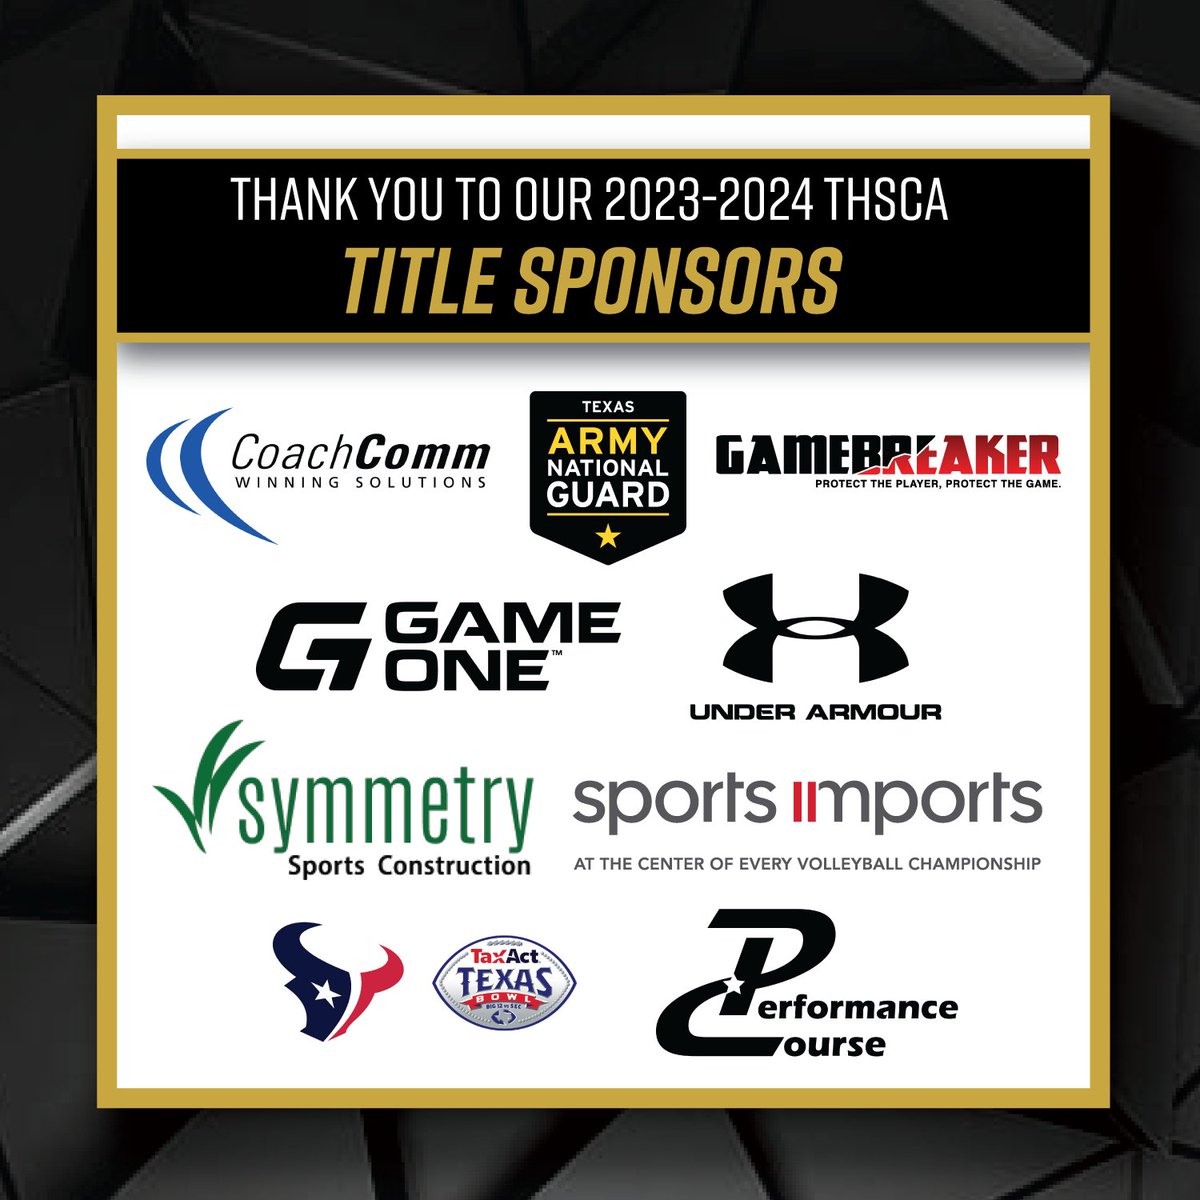 👏Let's hear it for our 23-24 THSCA Title Sponsors!👏 Thank you for supporting our Texas coaches! #THSCAstrong @CoachComm @TexasGuard @gamebreakerhg @GameOne_USA @UnderArmour @Symmetry_Sports @SportsImportsVB @HoustonTexans @TexasBowl @PCnowisthetime thsca.com/sponsors